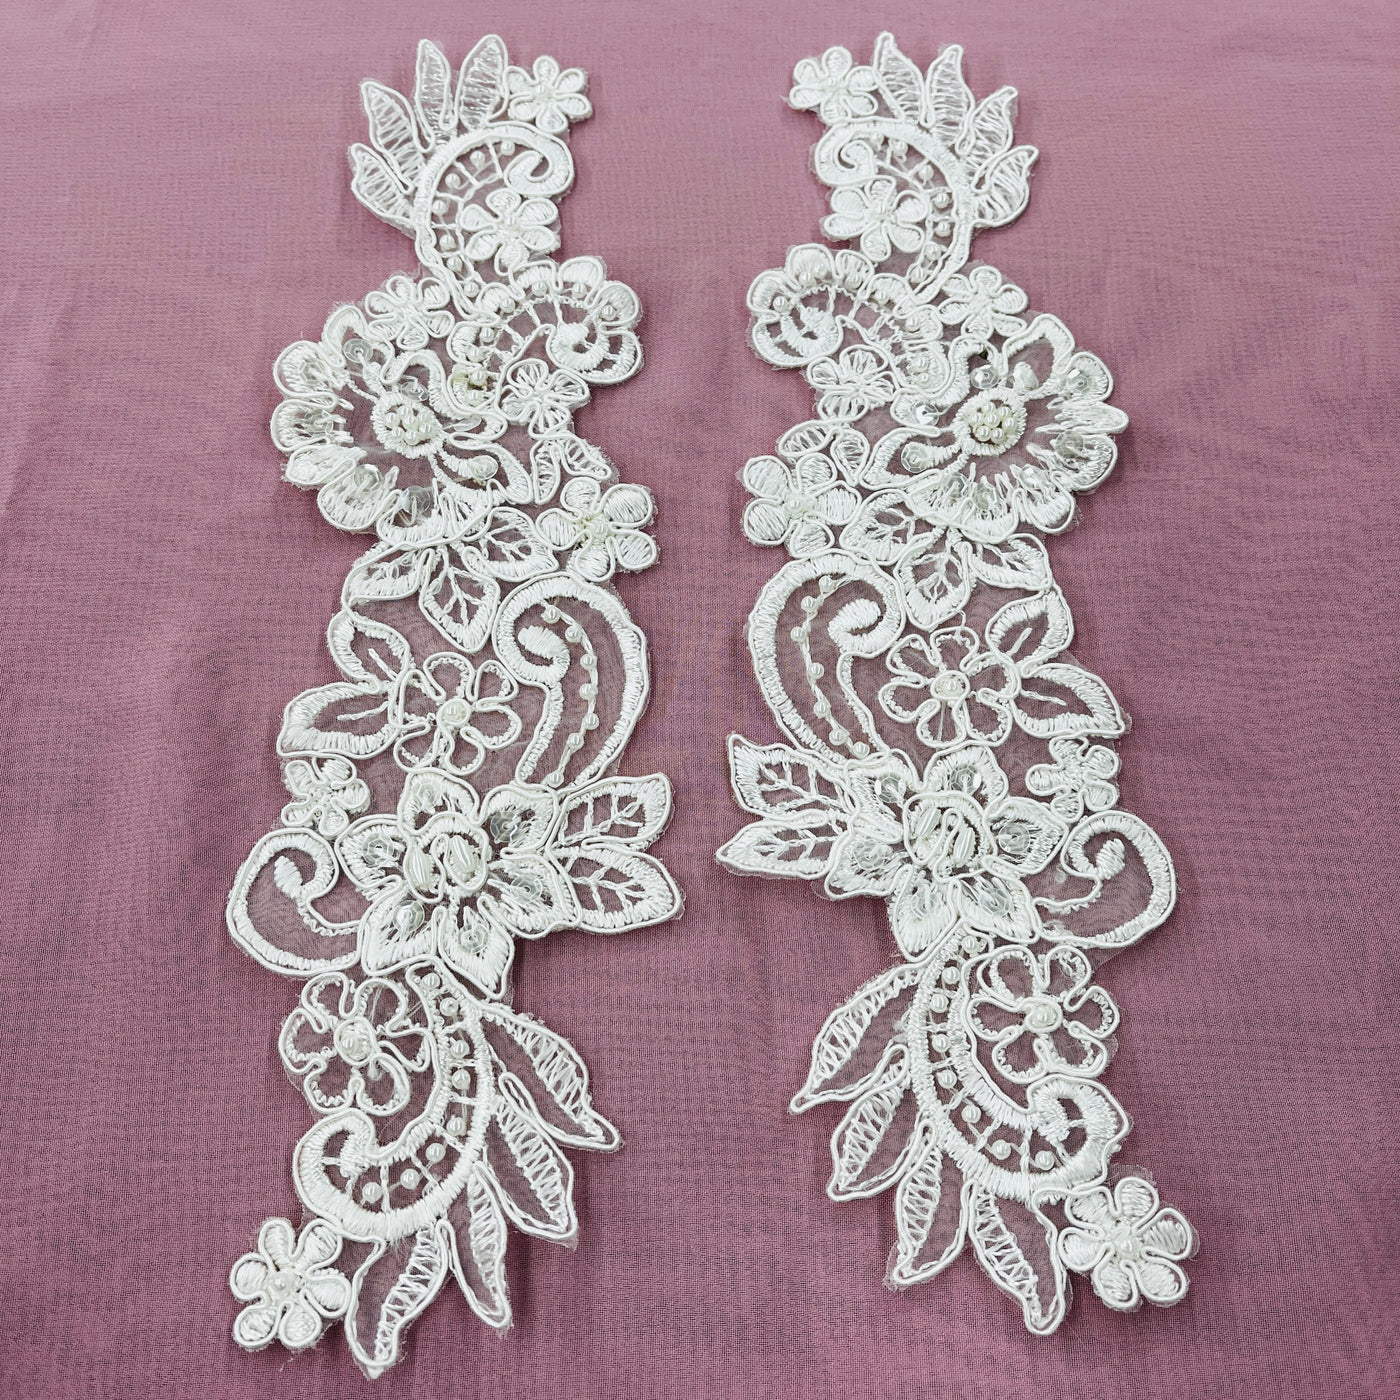 Beaded & Corded Floral Lace Applique Embroidered on 100% Polyester Organza | LaceUSA - 95931N-BP Ivory